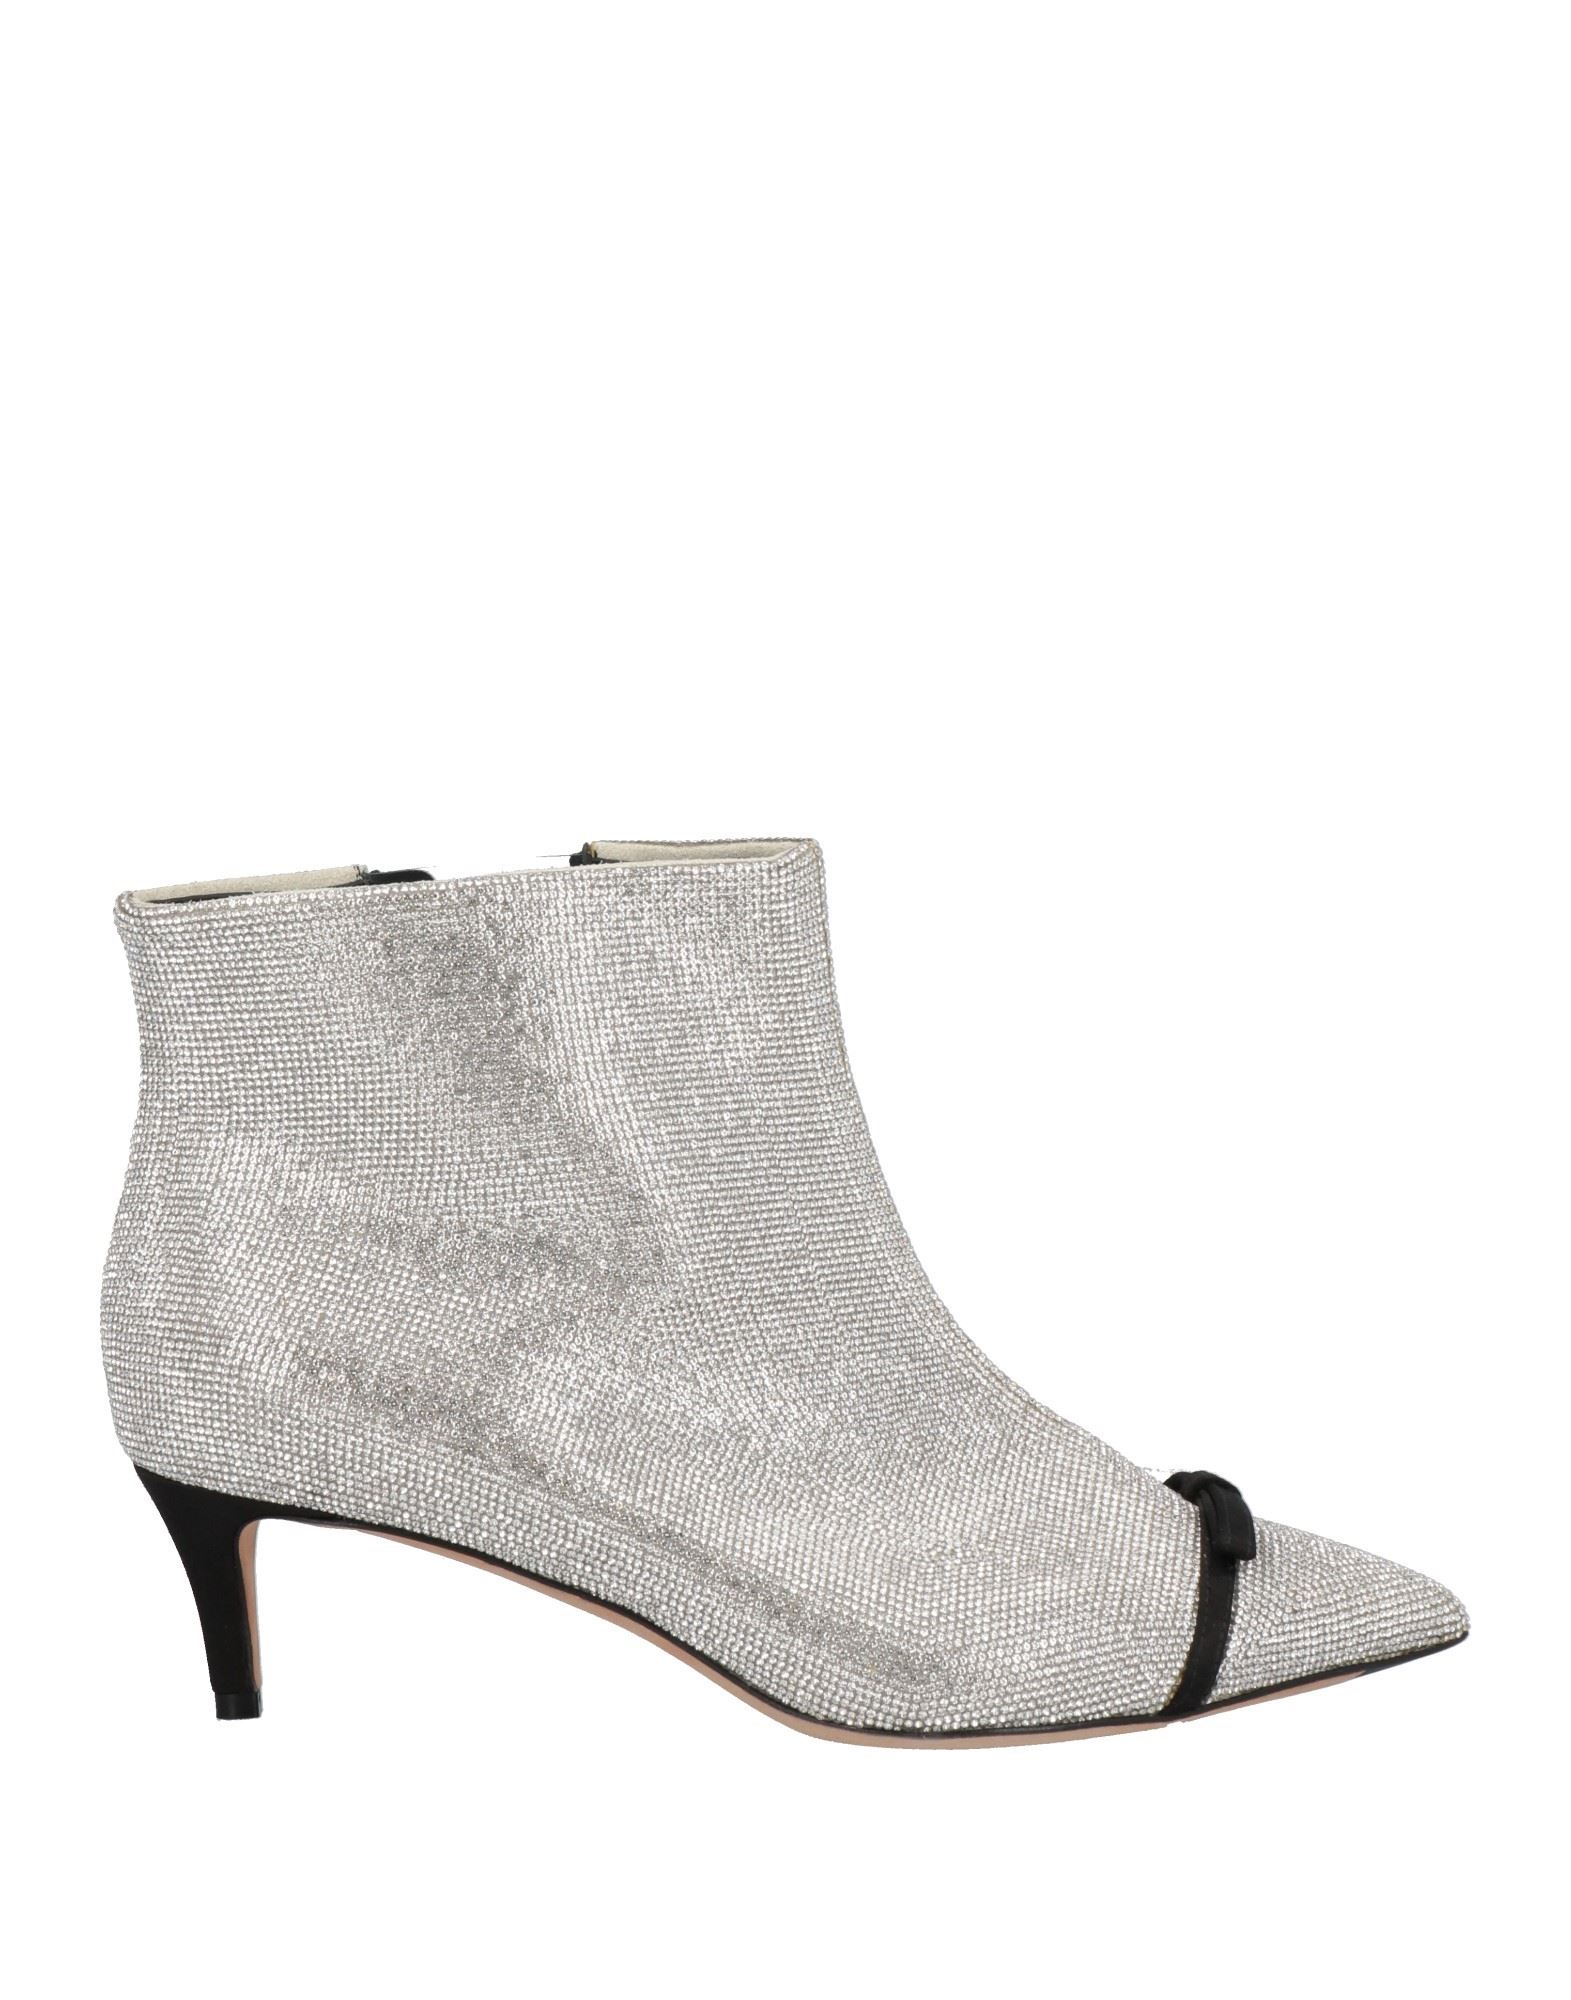 Marco De Vincenzo Ankle Boots In Metallic